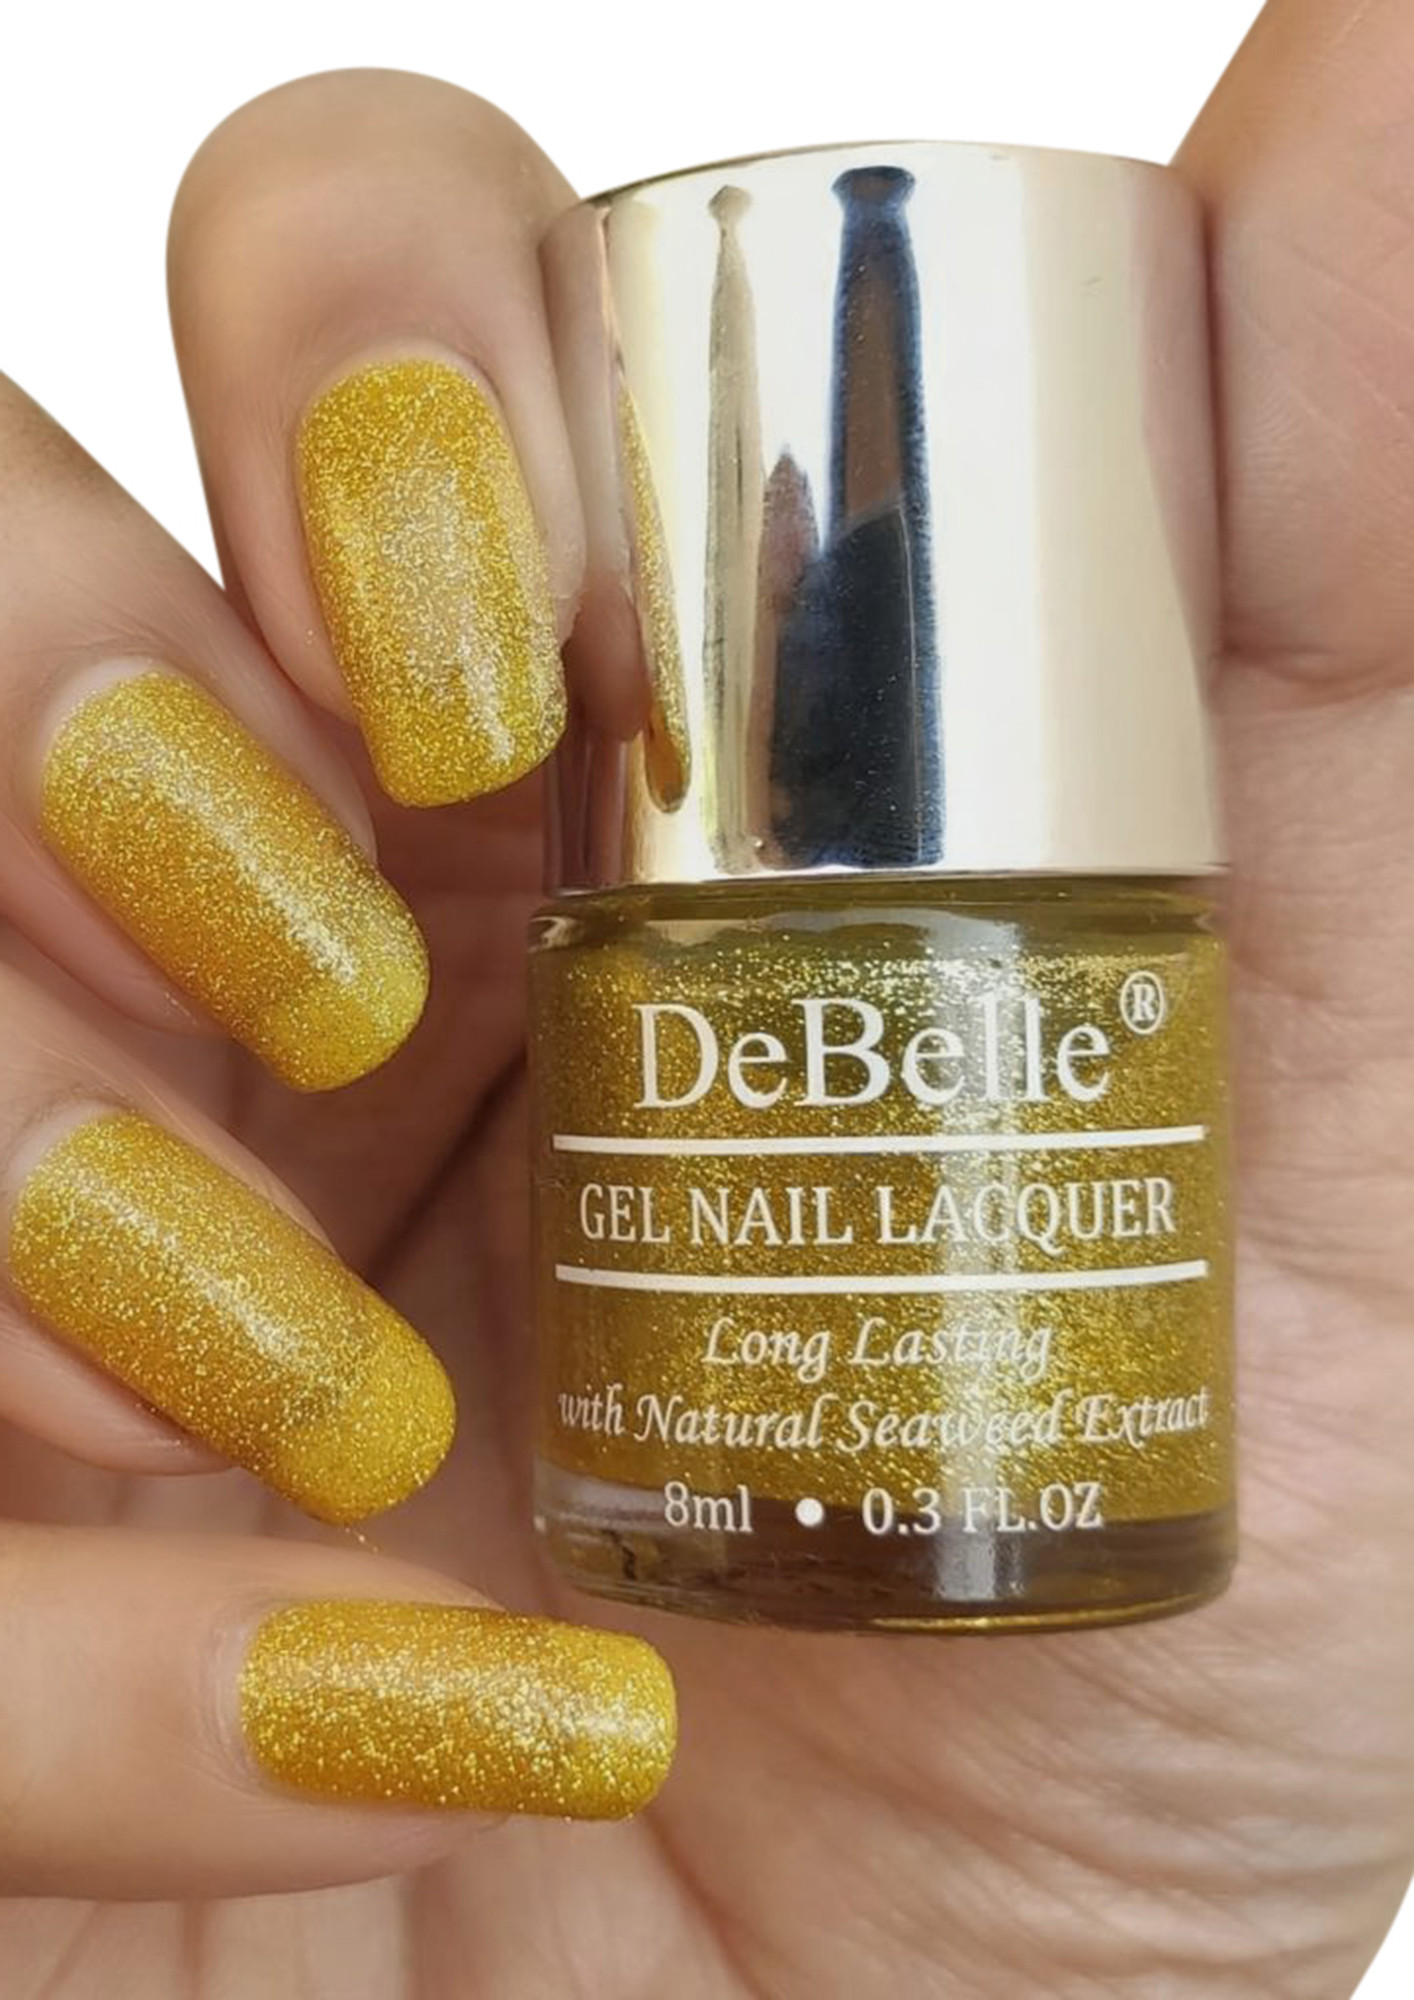 DeBelle Gel Nail Lacquer Pegasus Lime Yellow with Gold Glitter Nail Polish